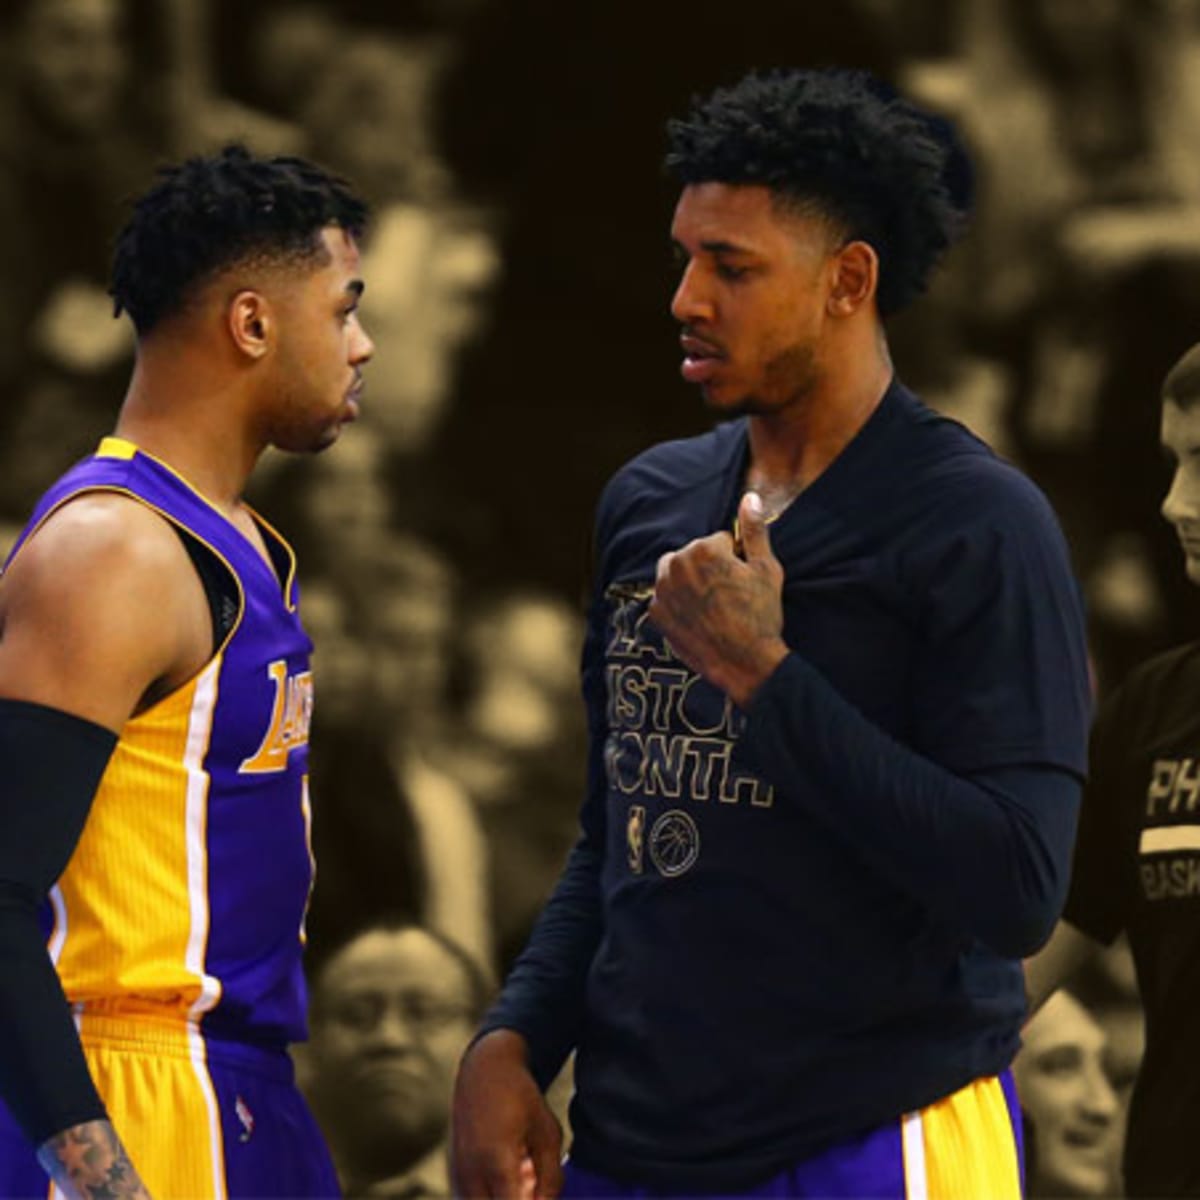 Nick Young on playing against Lakers: “I'm going to go in and try